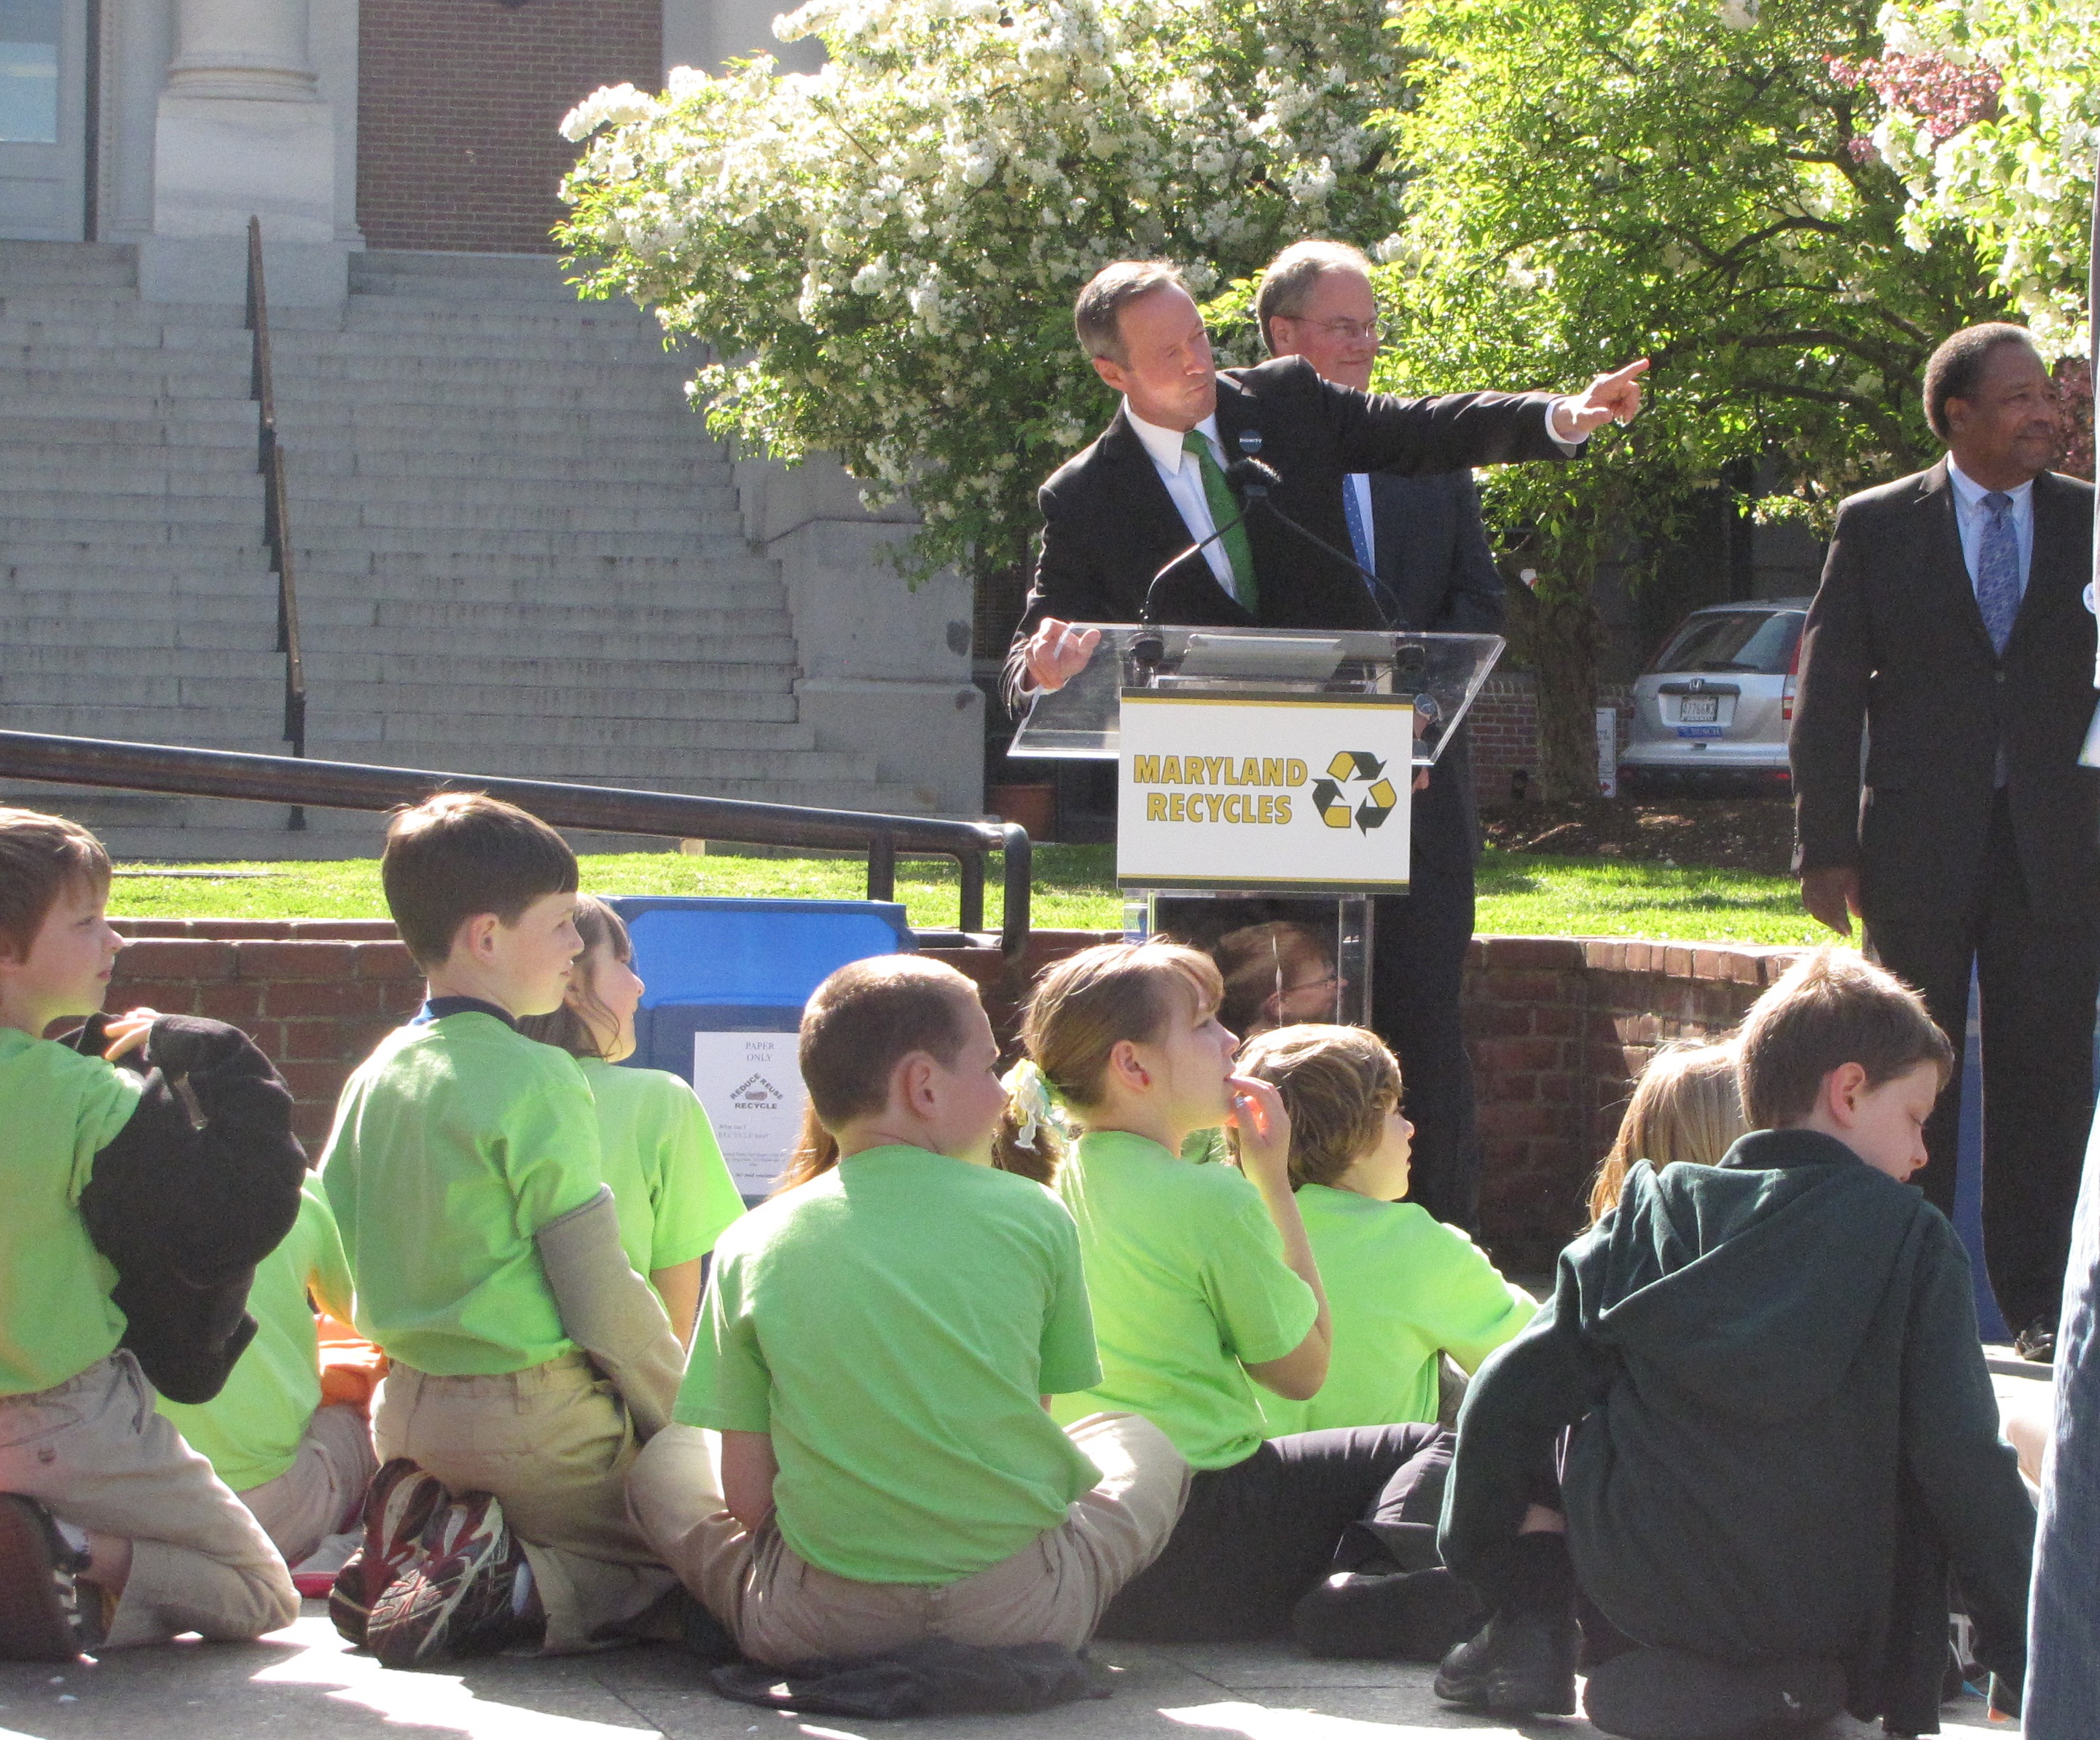 Students from St. Martin's School attend the Maryland Recycles rally with Gov. Martin O'Malley and MDE Secretary Robert M. Summers